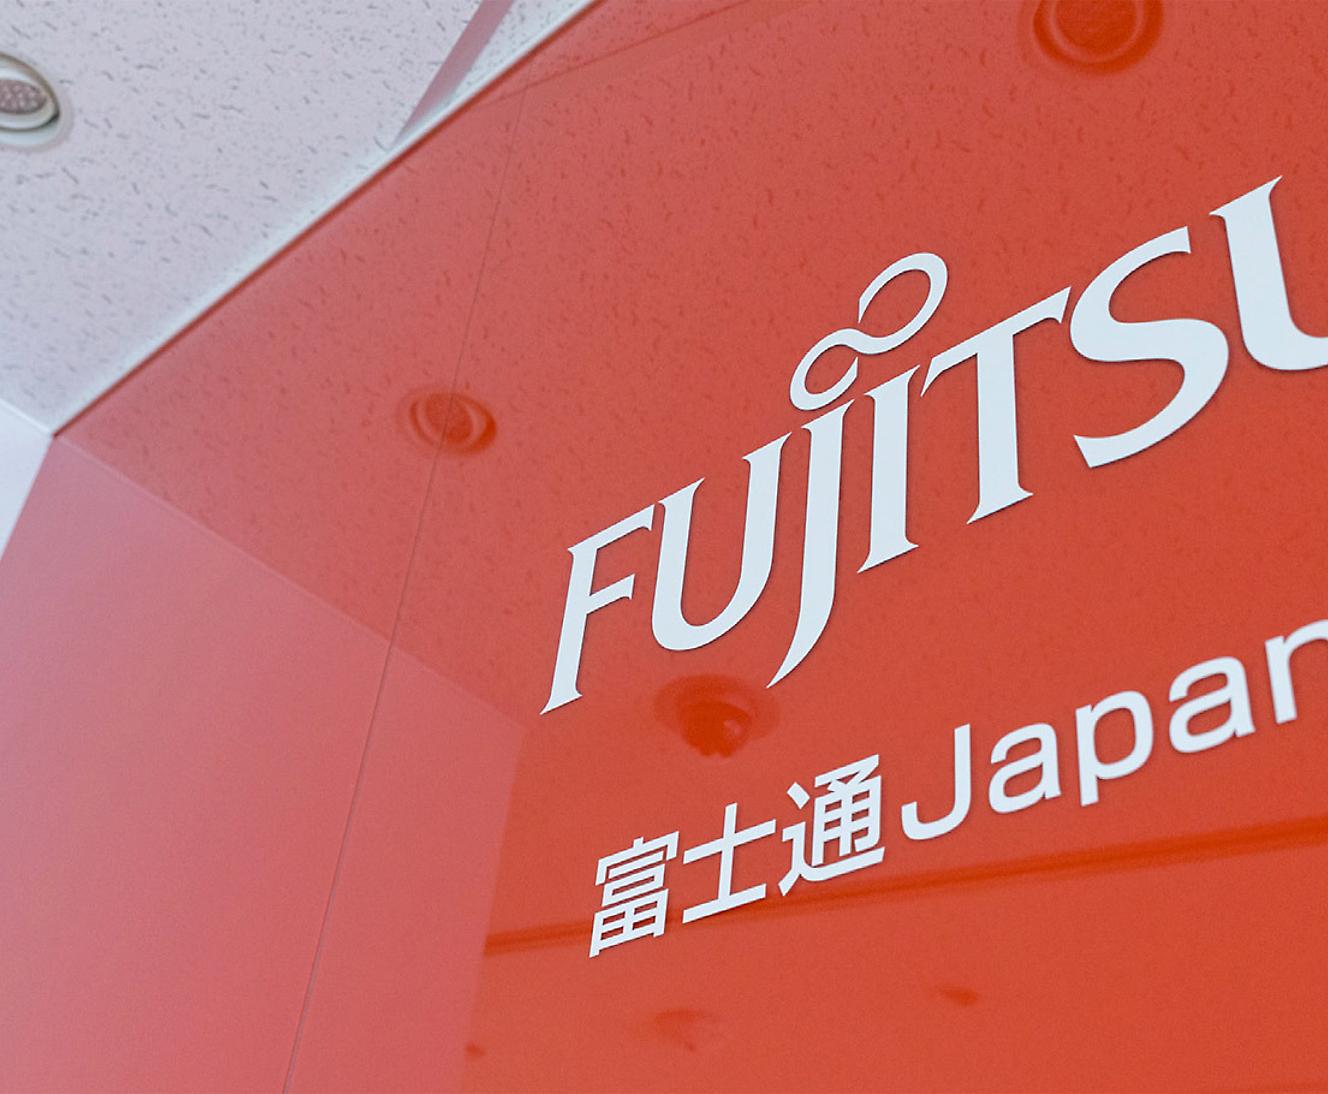 Partial close-up of a fujitsu sign with logo and japanese text on a red background, angled perspective 